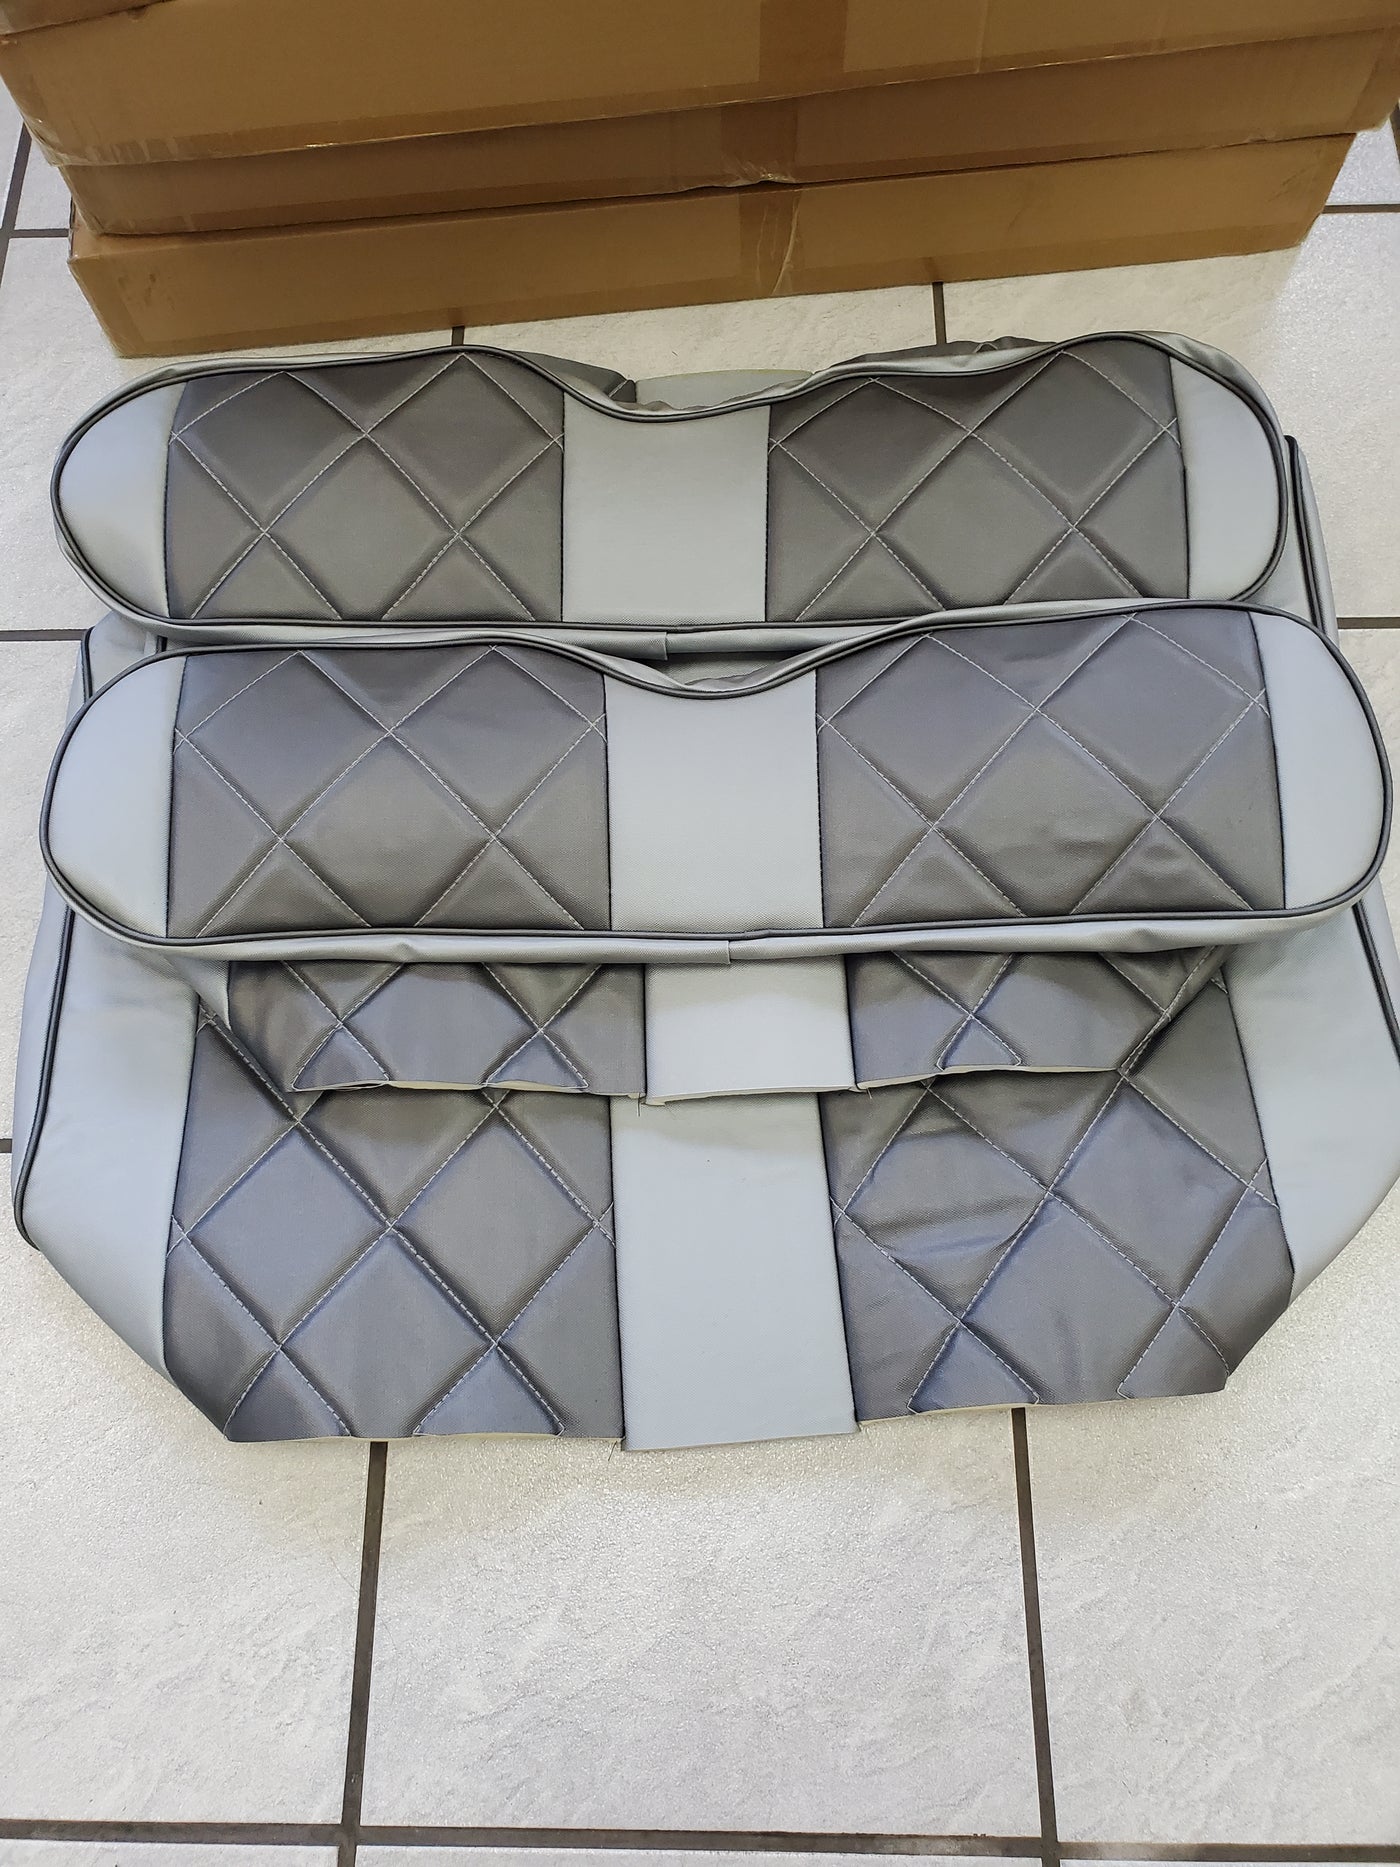 Custom Diamond Stich Charcoal Gray & Silver Ez-Go ( Ezgo ) Txt/Rxv or Club Car DS 2000-2013 Cart Front Rear Seat Covers